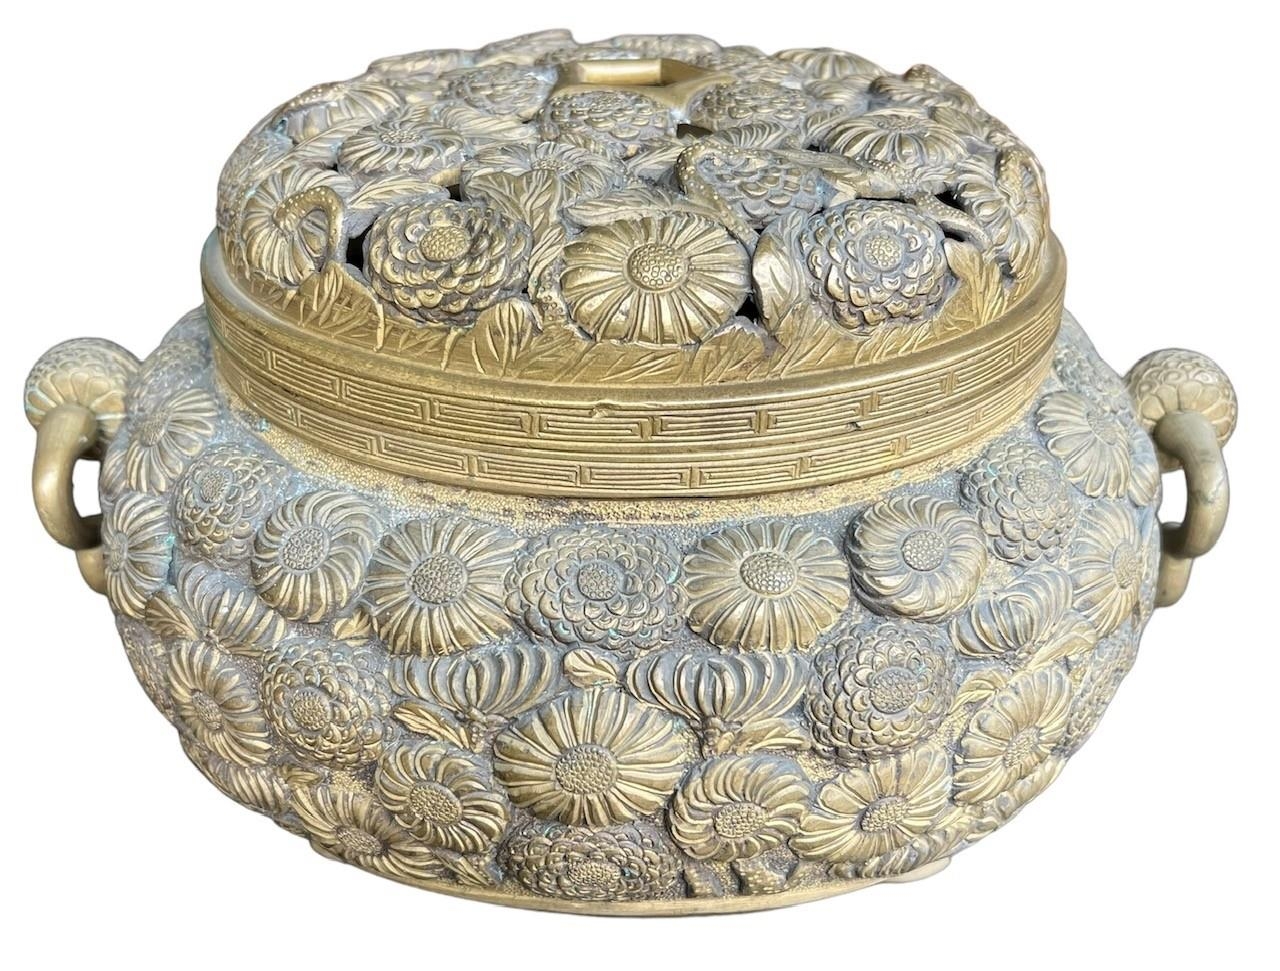 A LARGE JAPANESE MEIJI PERIOD BRONZE KORO AND COVER Decorated with sixteenth petal chrysanthemum - Image 2 of 8